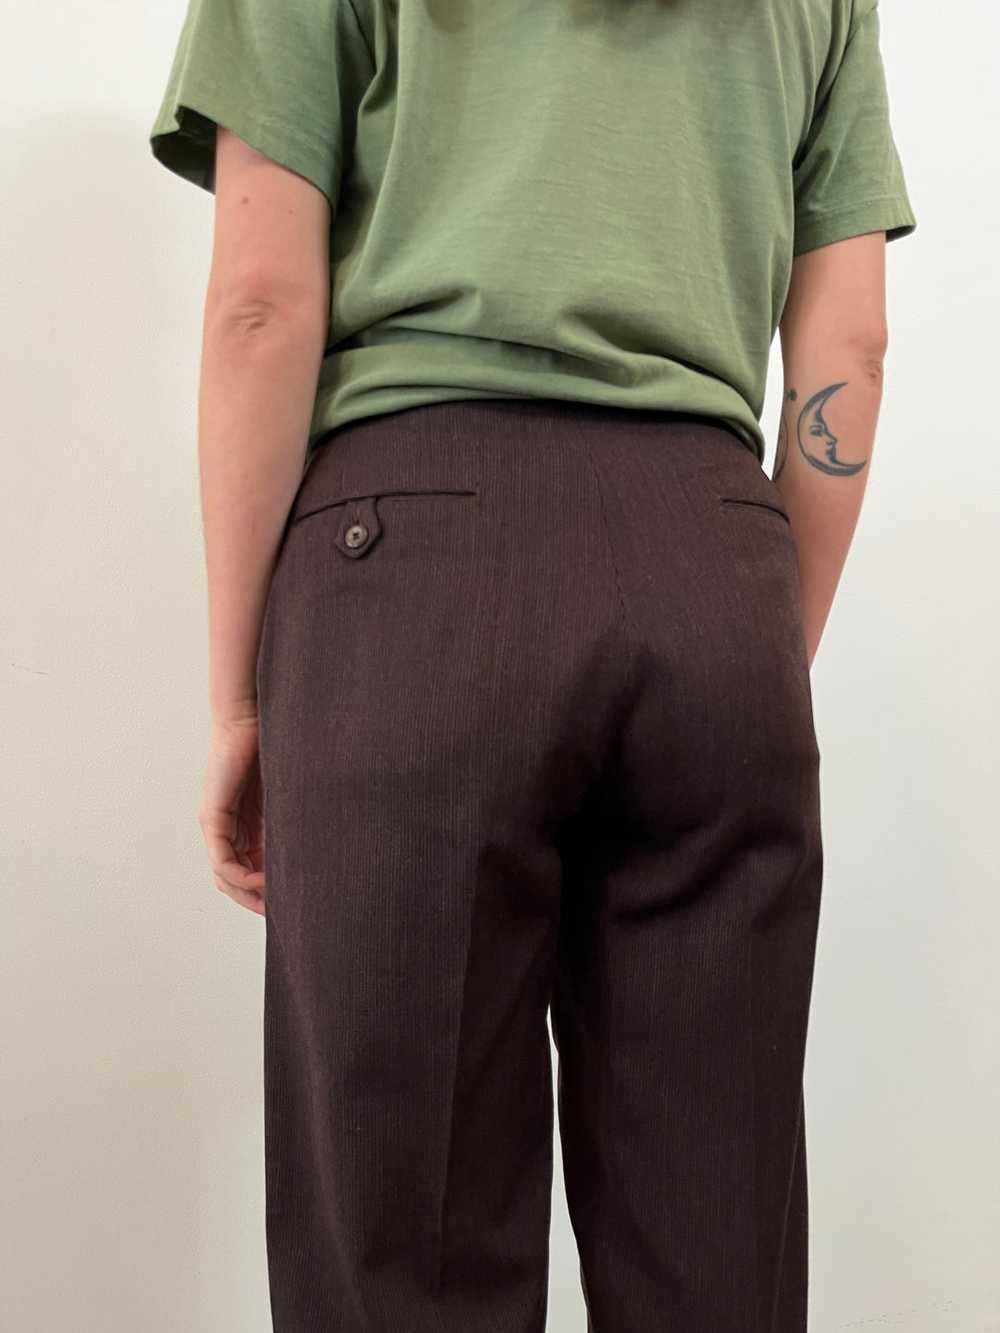 50s/60s Brown Twill Work Pants - image 5